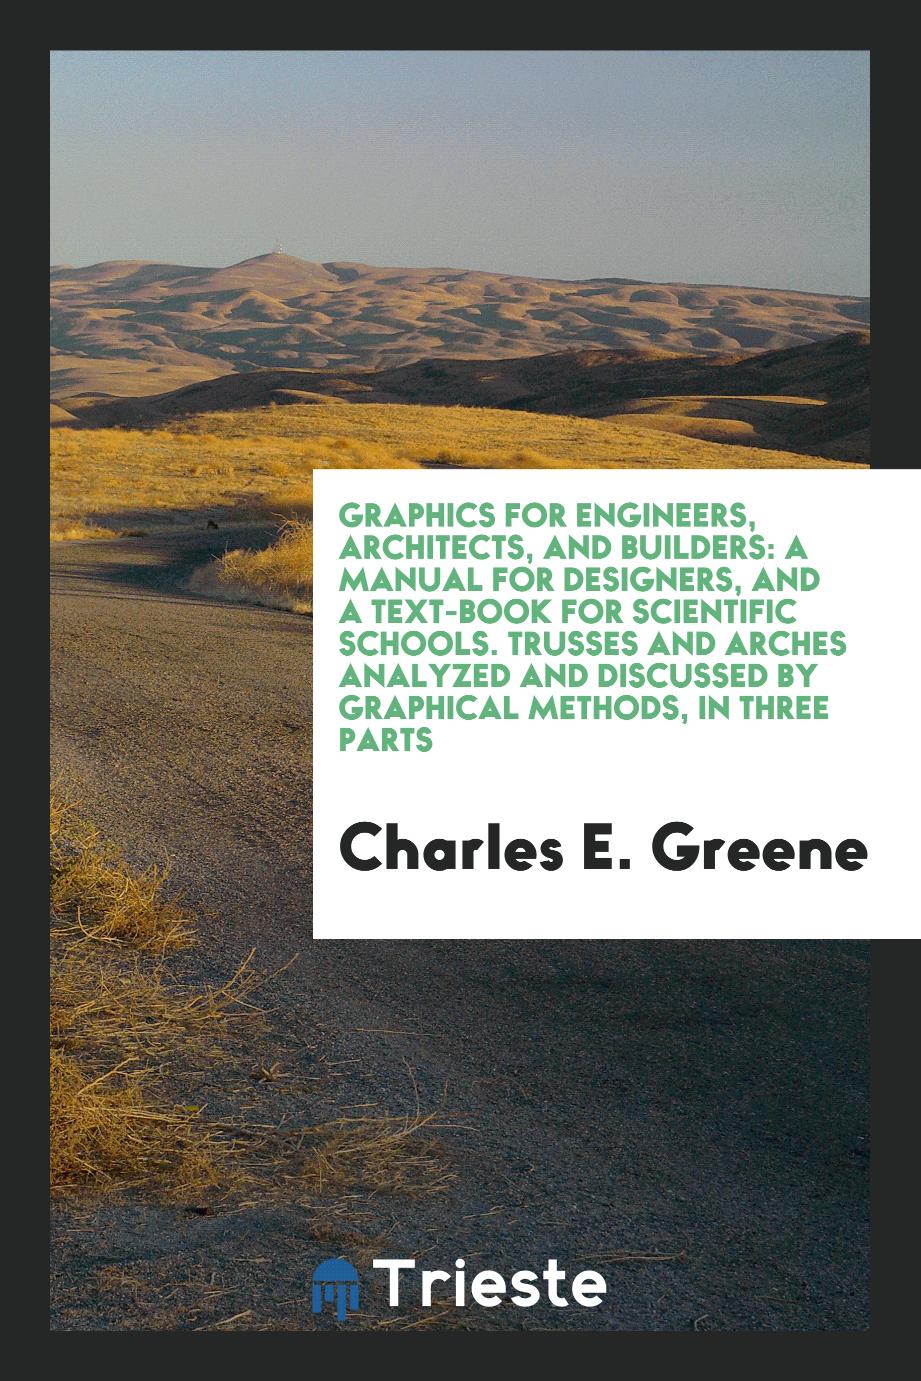 Graphics for Engineers, Architects, and Builders: A Manual for Designers, and a Text-Book for Scientific Schools. Trusses and Arches Analyzed and Discussed by Graphical Methods, in Three Parts